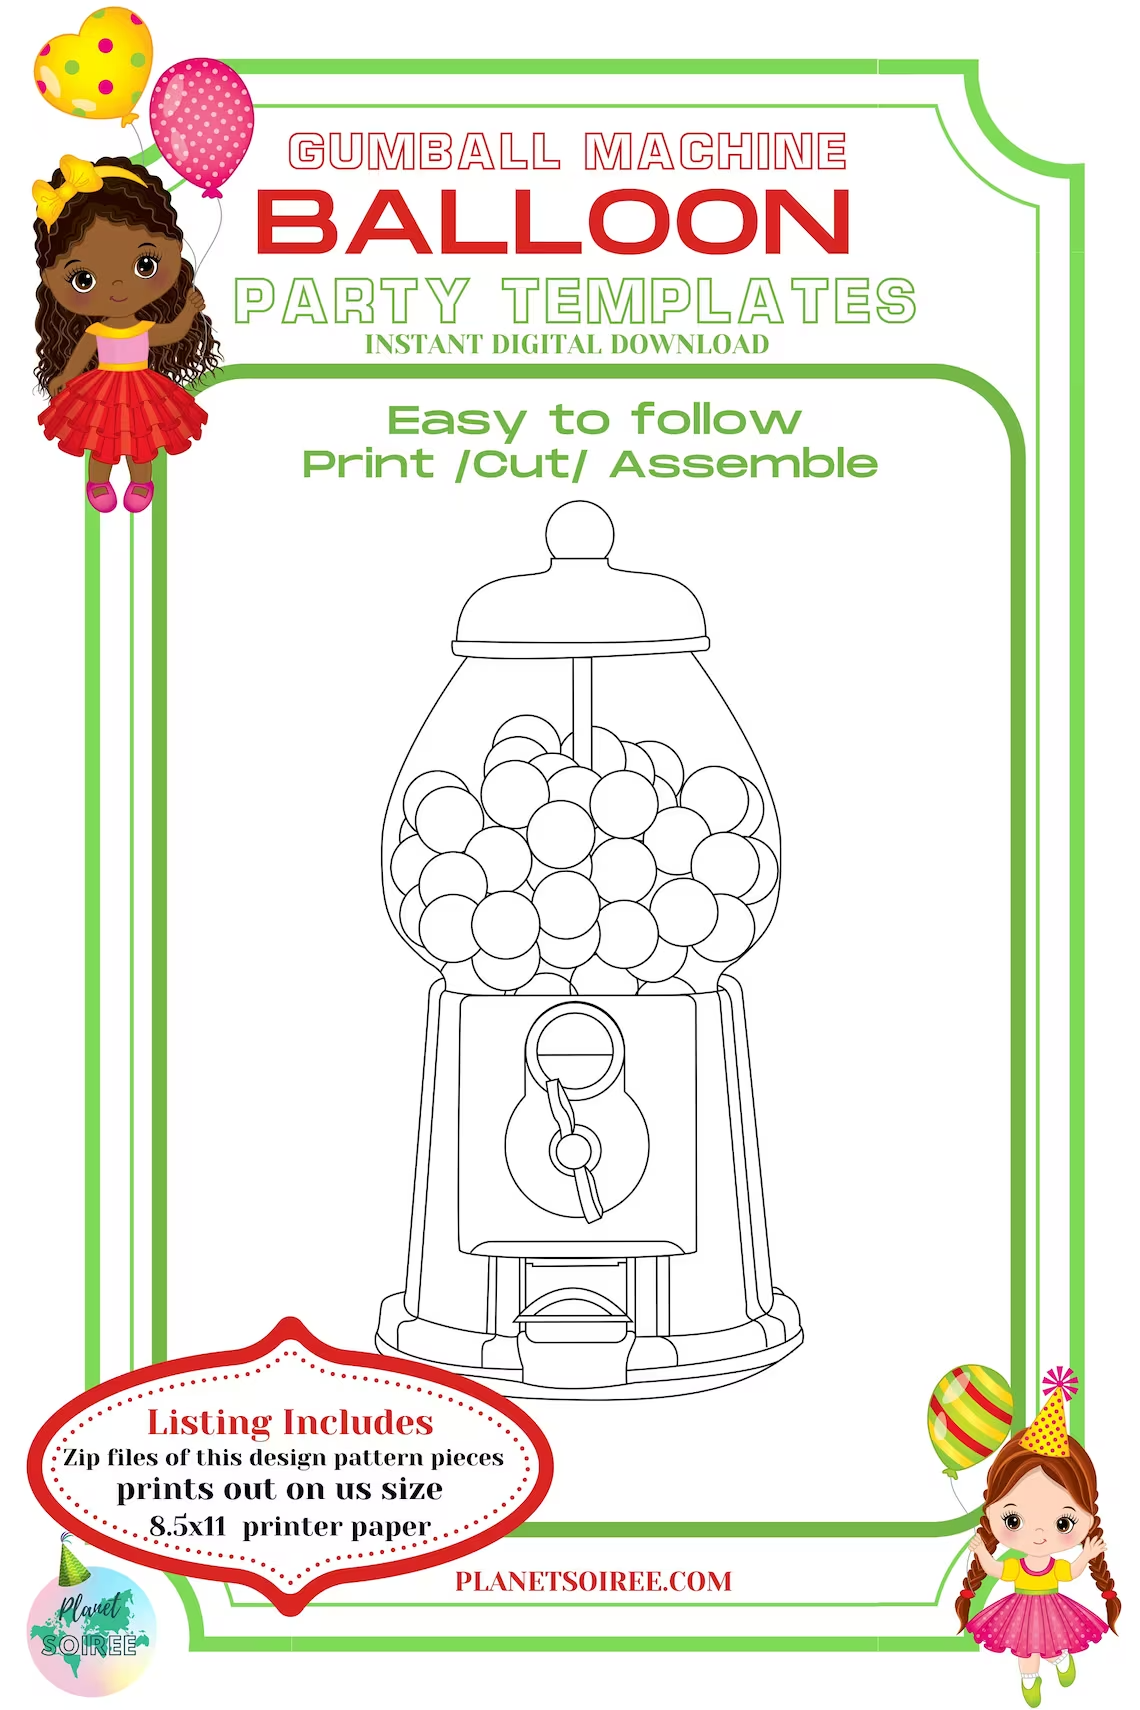 Candy Gumball Machine, CandyLand, Digital Download , Circus, Balloon Templates for Birthday and party, Mosaic Balloon